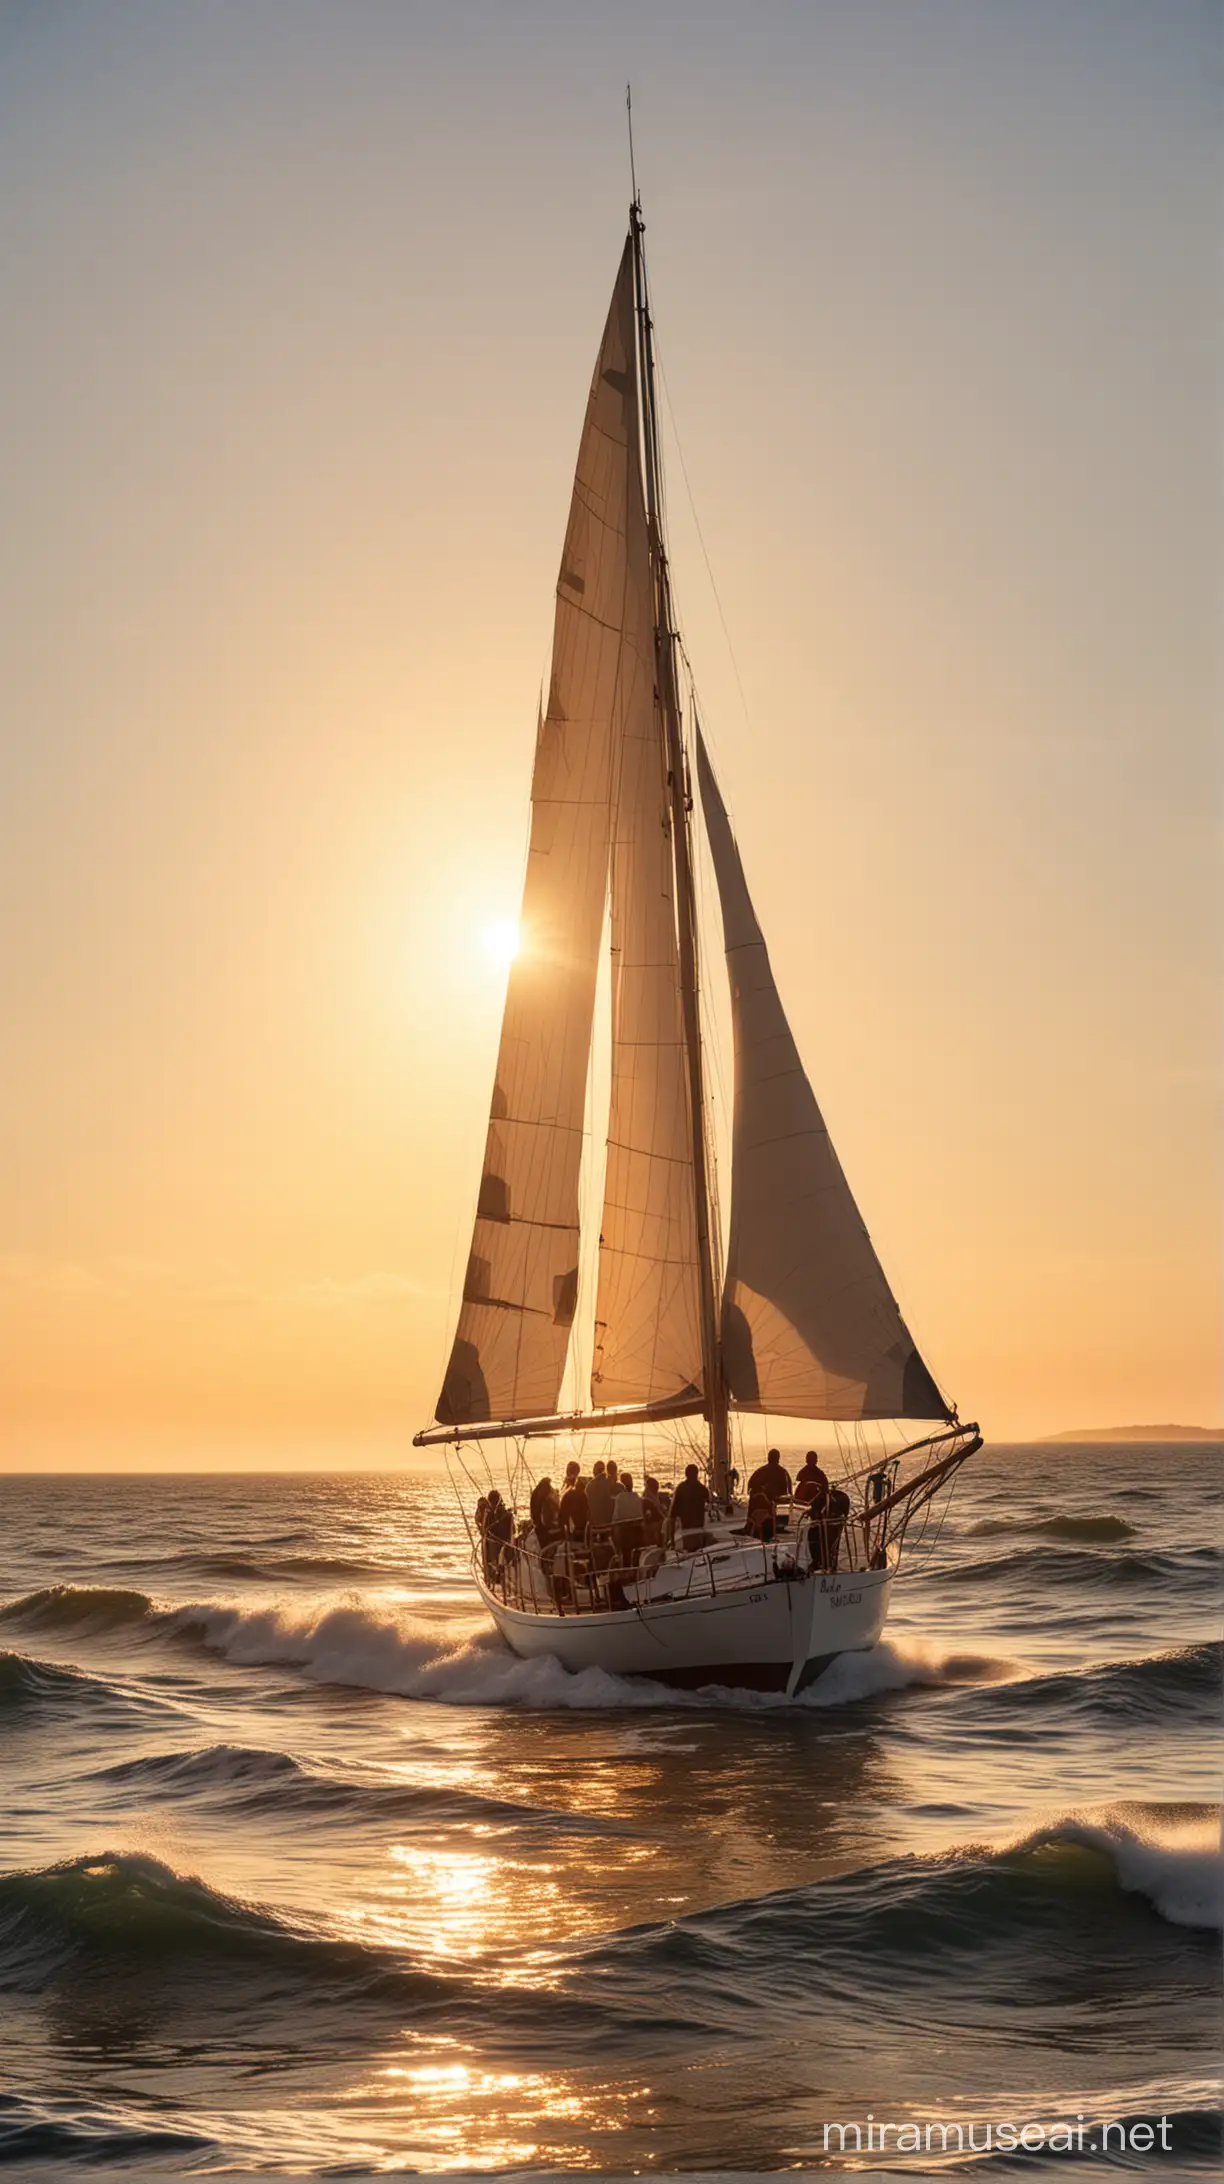 Sailboat at Dawn with Open Sails and People Aboard